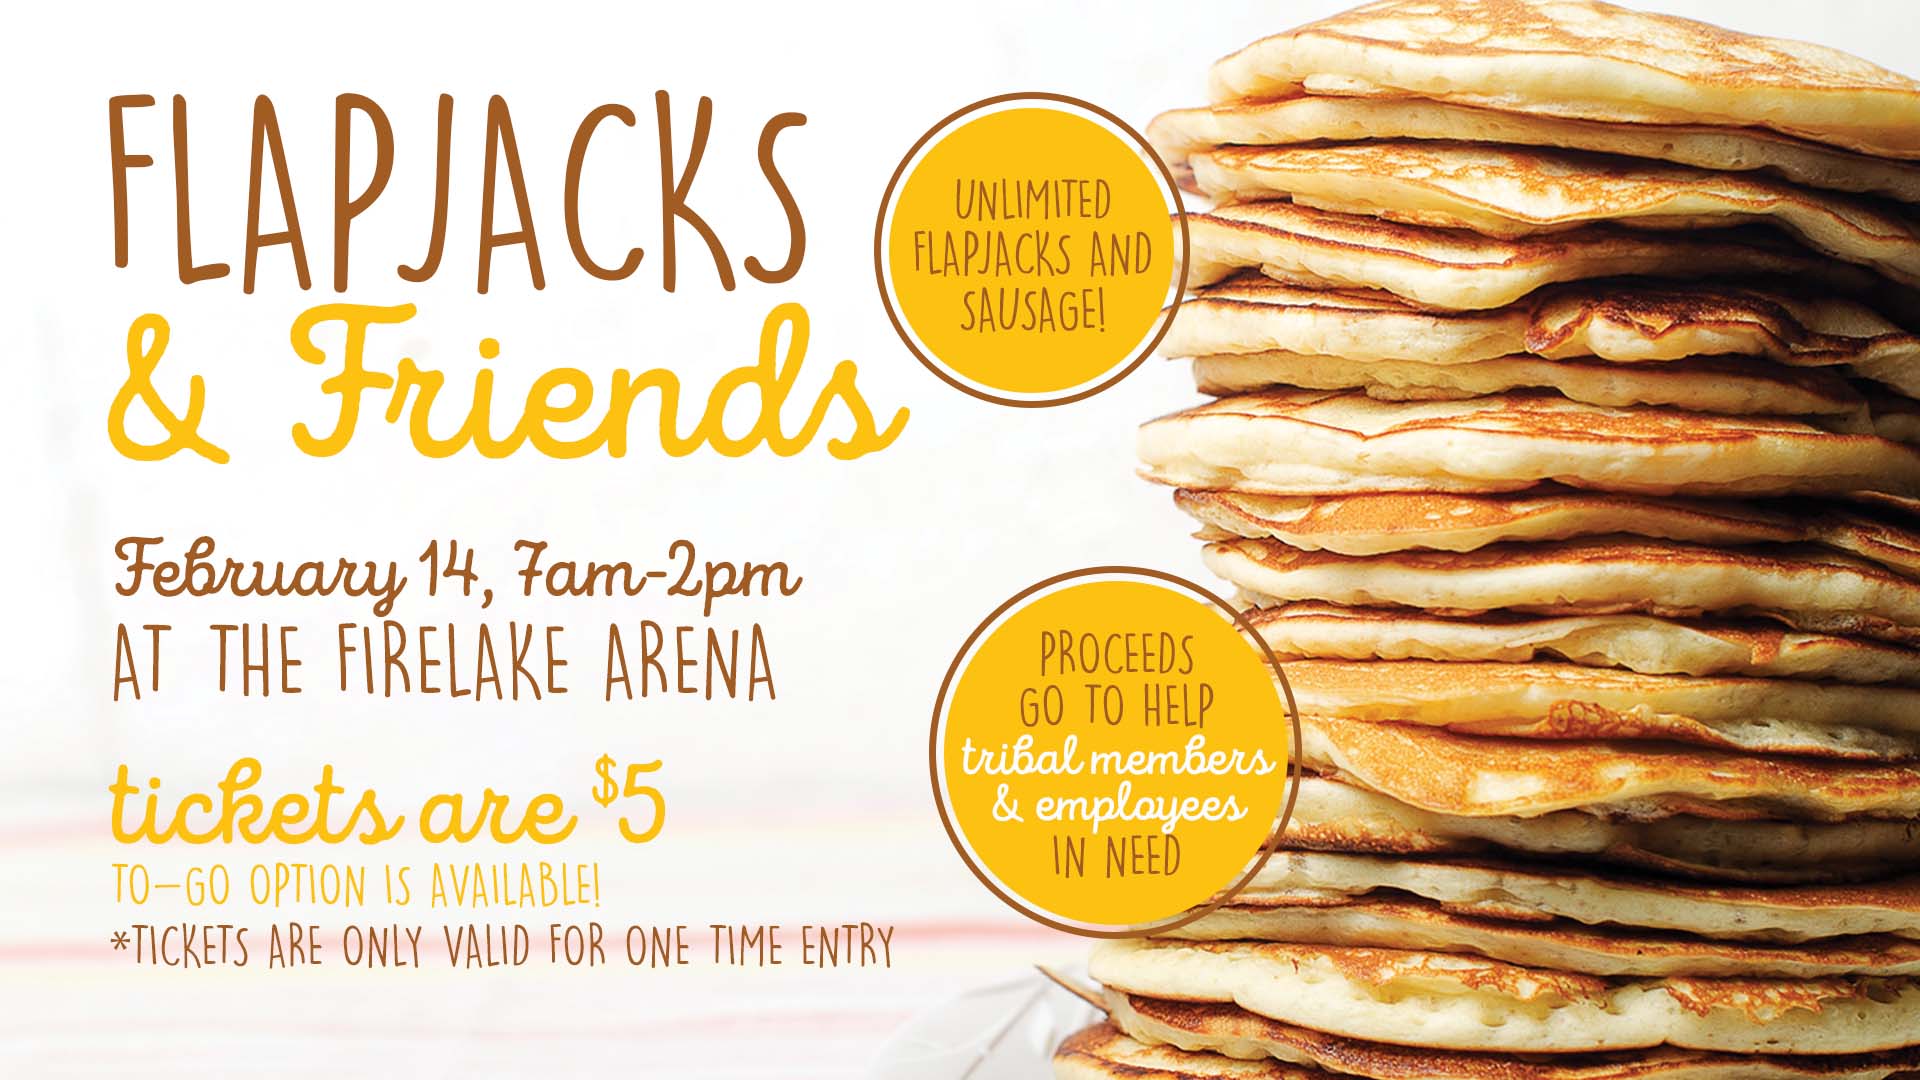 A graphic advertising the CPN Flapjacks & Friends event. A stack of pancakes runs along the right hand side of the image, and yellow and gold text on the left reads: "Flapjacks & Friends, February 14, 7am - 2pm at the FireLake Arena. Tickets are $5. To-go option is available! Tickets are only valid for one time entry." Yellow circles evoking pancakes float over the graphic reading "Unlimited flapjacks and sausage!" and "Proceeds go to help tribal members and employees in need."